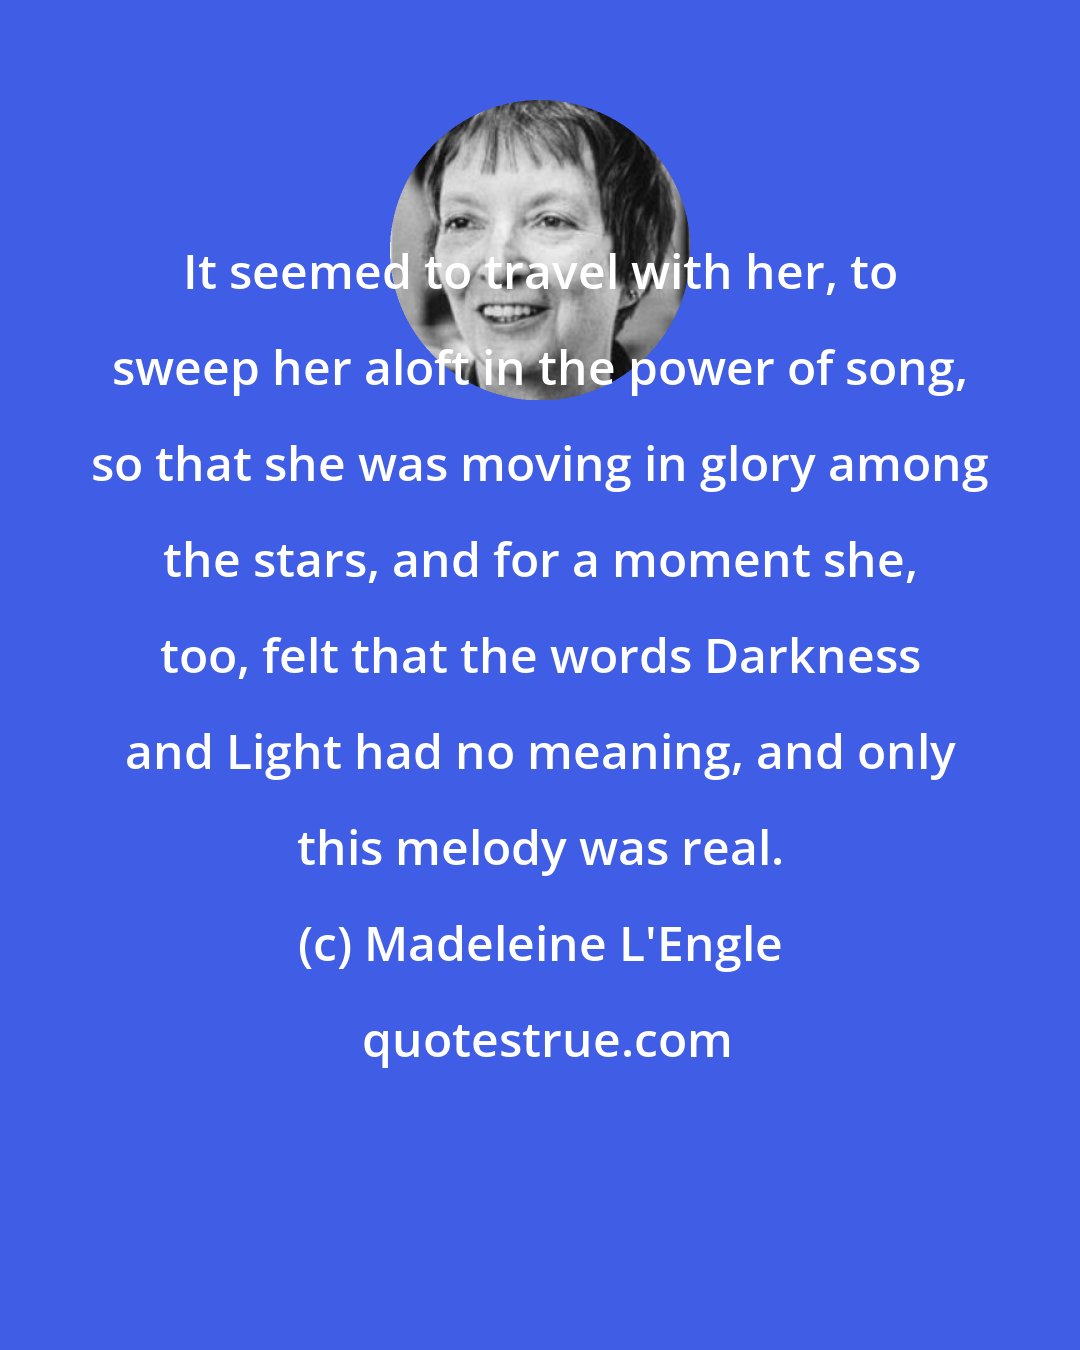 Madeleine L'Engle: It seemed to travel with her, to sweep her aloft in the power of song, so that she was moving in glory among the stars, and for a moment she, too, felt that the words Darkness and Light had no meaning, and only this melody was real.